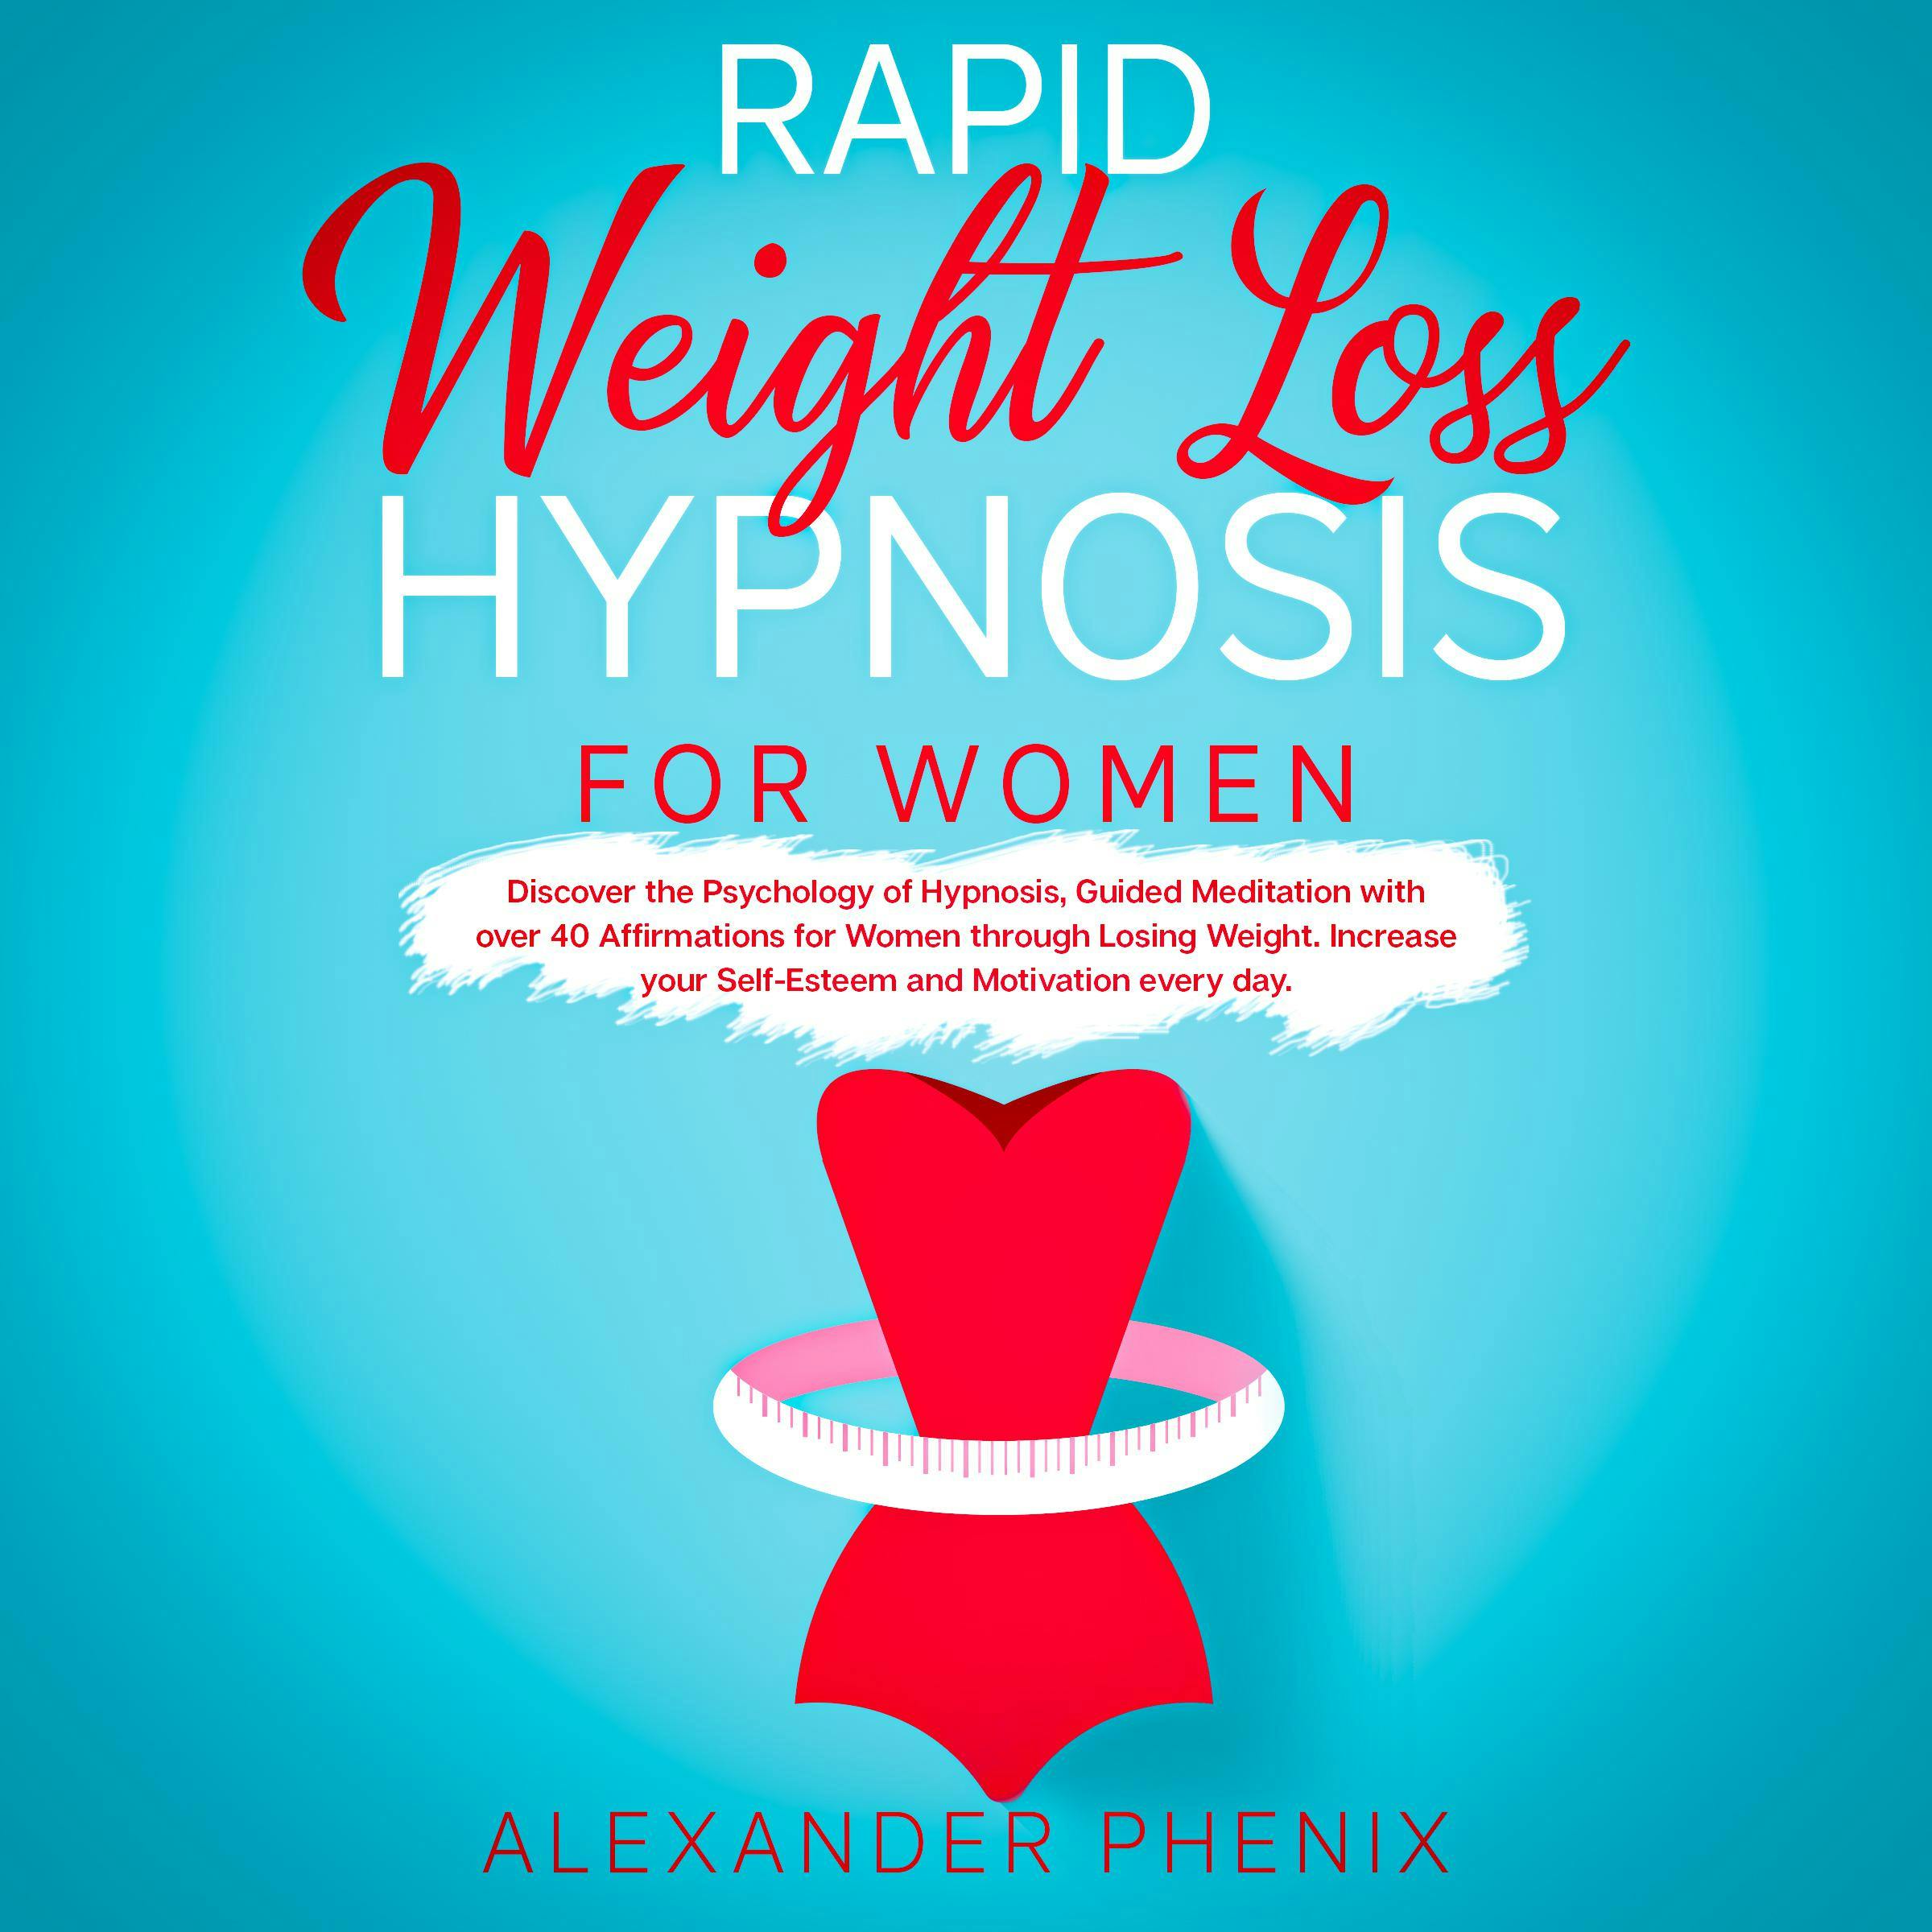 Rapid Weight Loss Hypnosis for Women: Discover the Psychology of Hypnosis,Guided Meditation with over 40 Affirmations for Women through Losing Weight.Increase your Self-Esteem and Motivation every day - Alexander Phenix